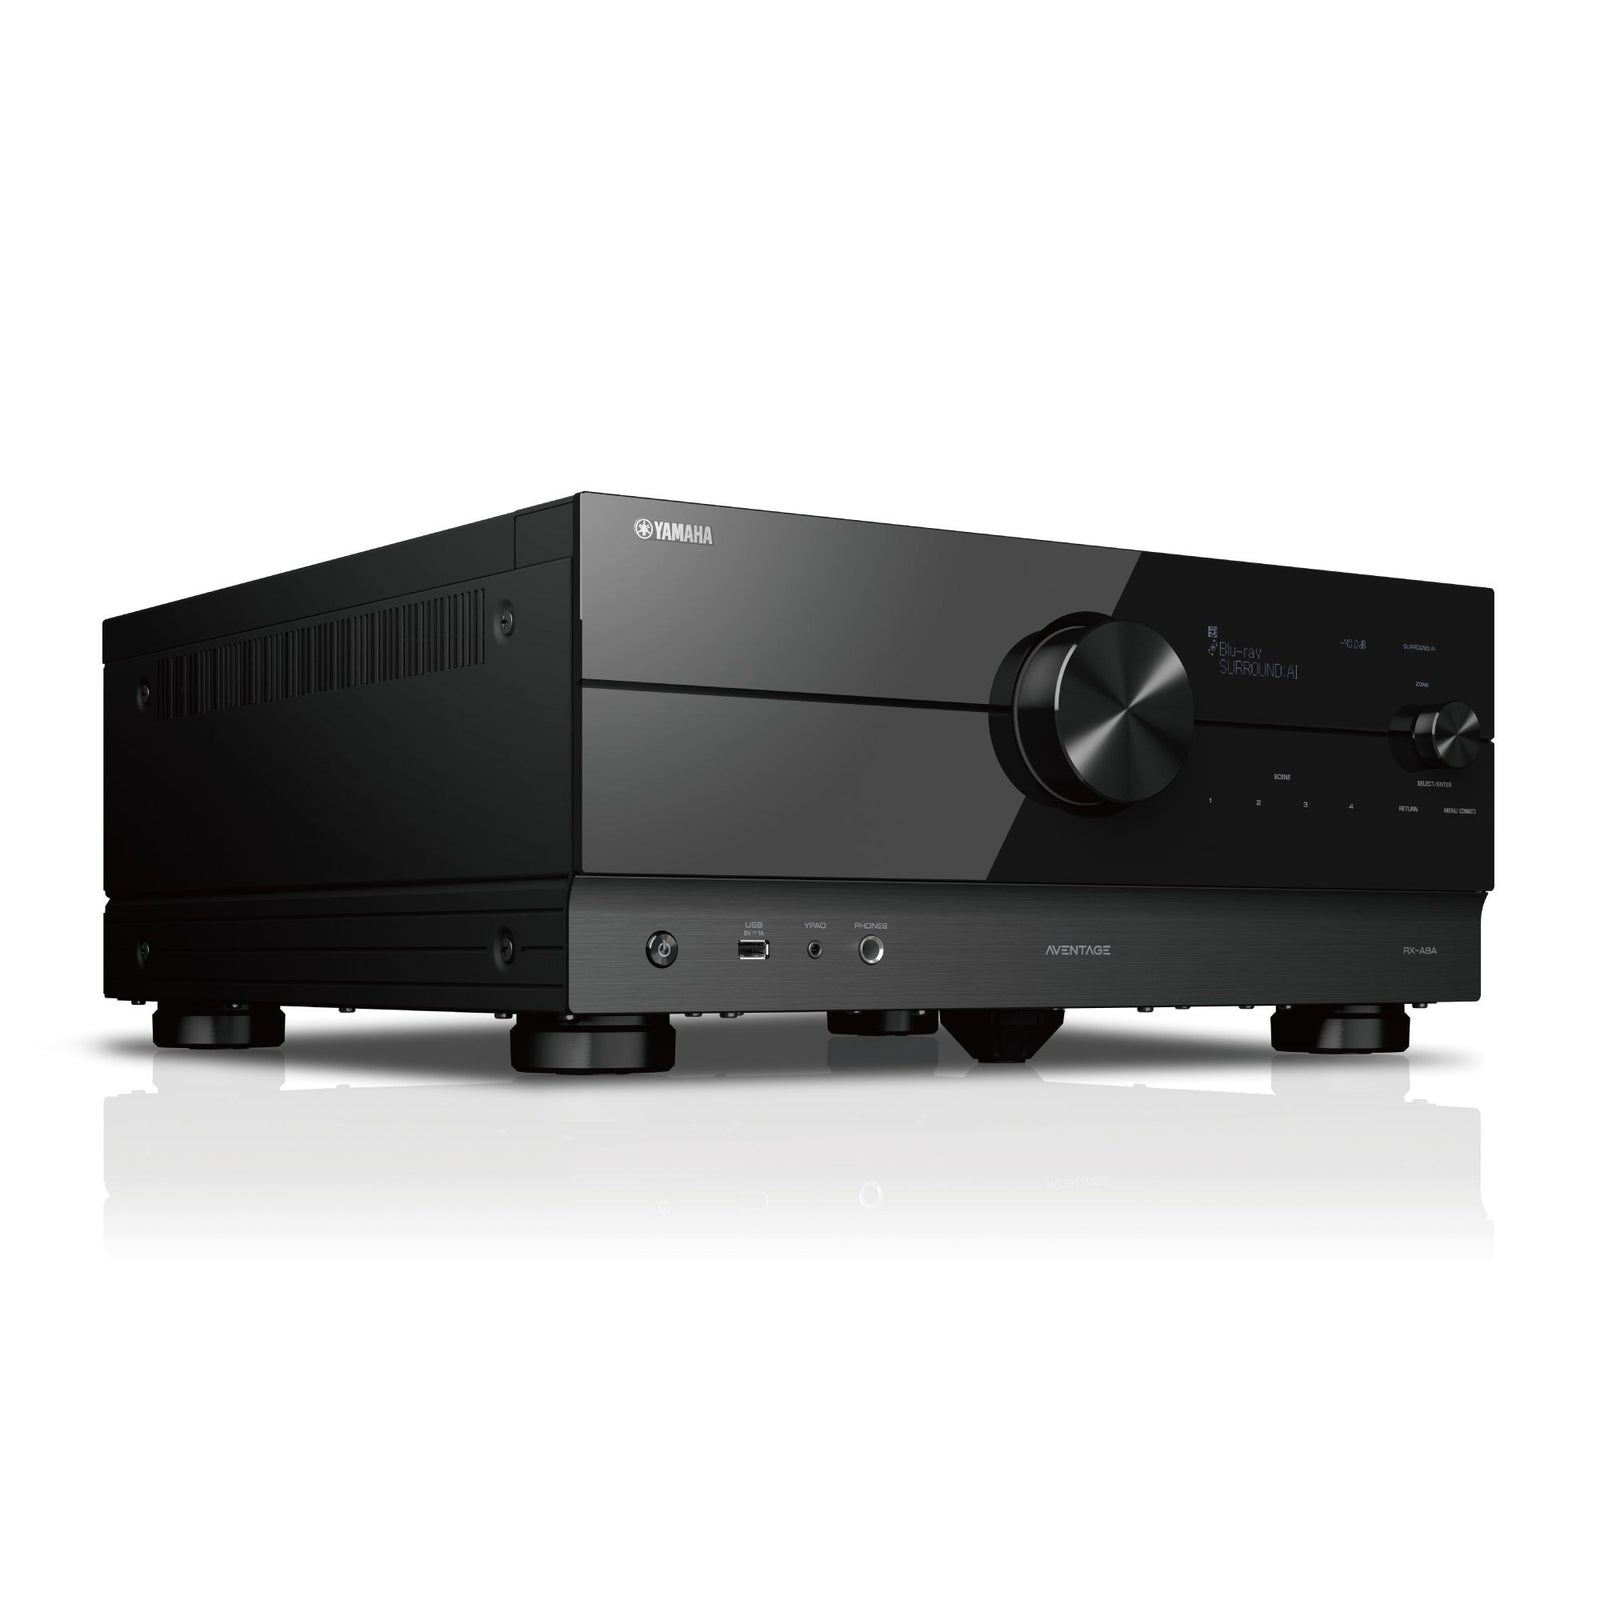 YAMAHA RX-A8A - AVENTAGE AV RECEIVERS | VINYL SOUND - 11.2 ch Ultimate quality AVENTAGE with Surround:AI™, HDMI™ 7-in/3-out, the latest QCS407. 11.2 channel powerful surround sound with Zone2/3/4 Wi-Fi, Bluetooth®, AirPlay 2, Spotify Connect and MusicCast multi-room audio AURO-3D® Dolby Atmos® and DTS:X®